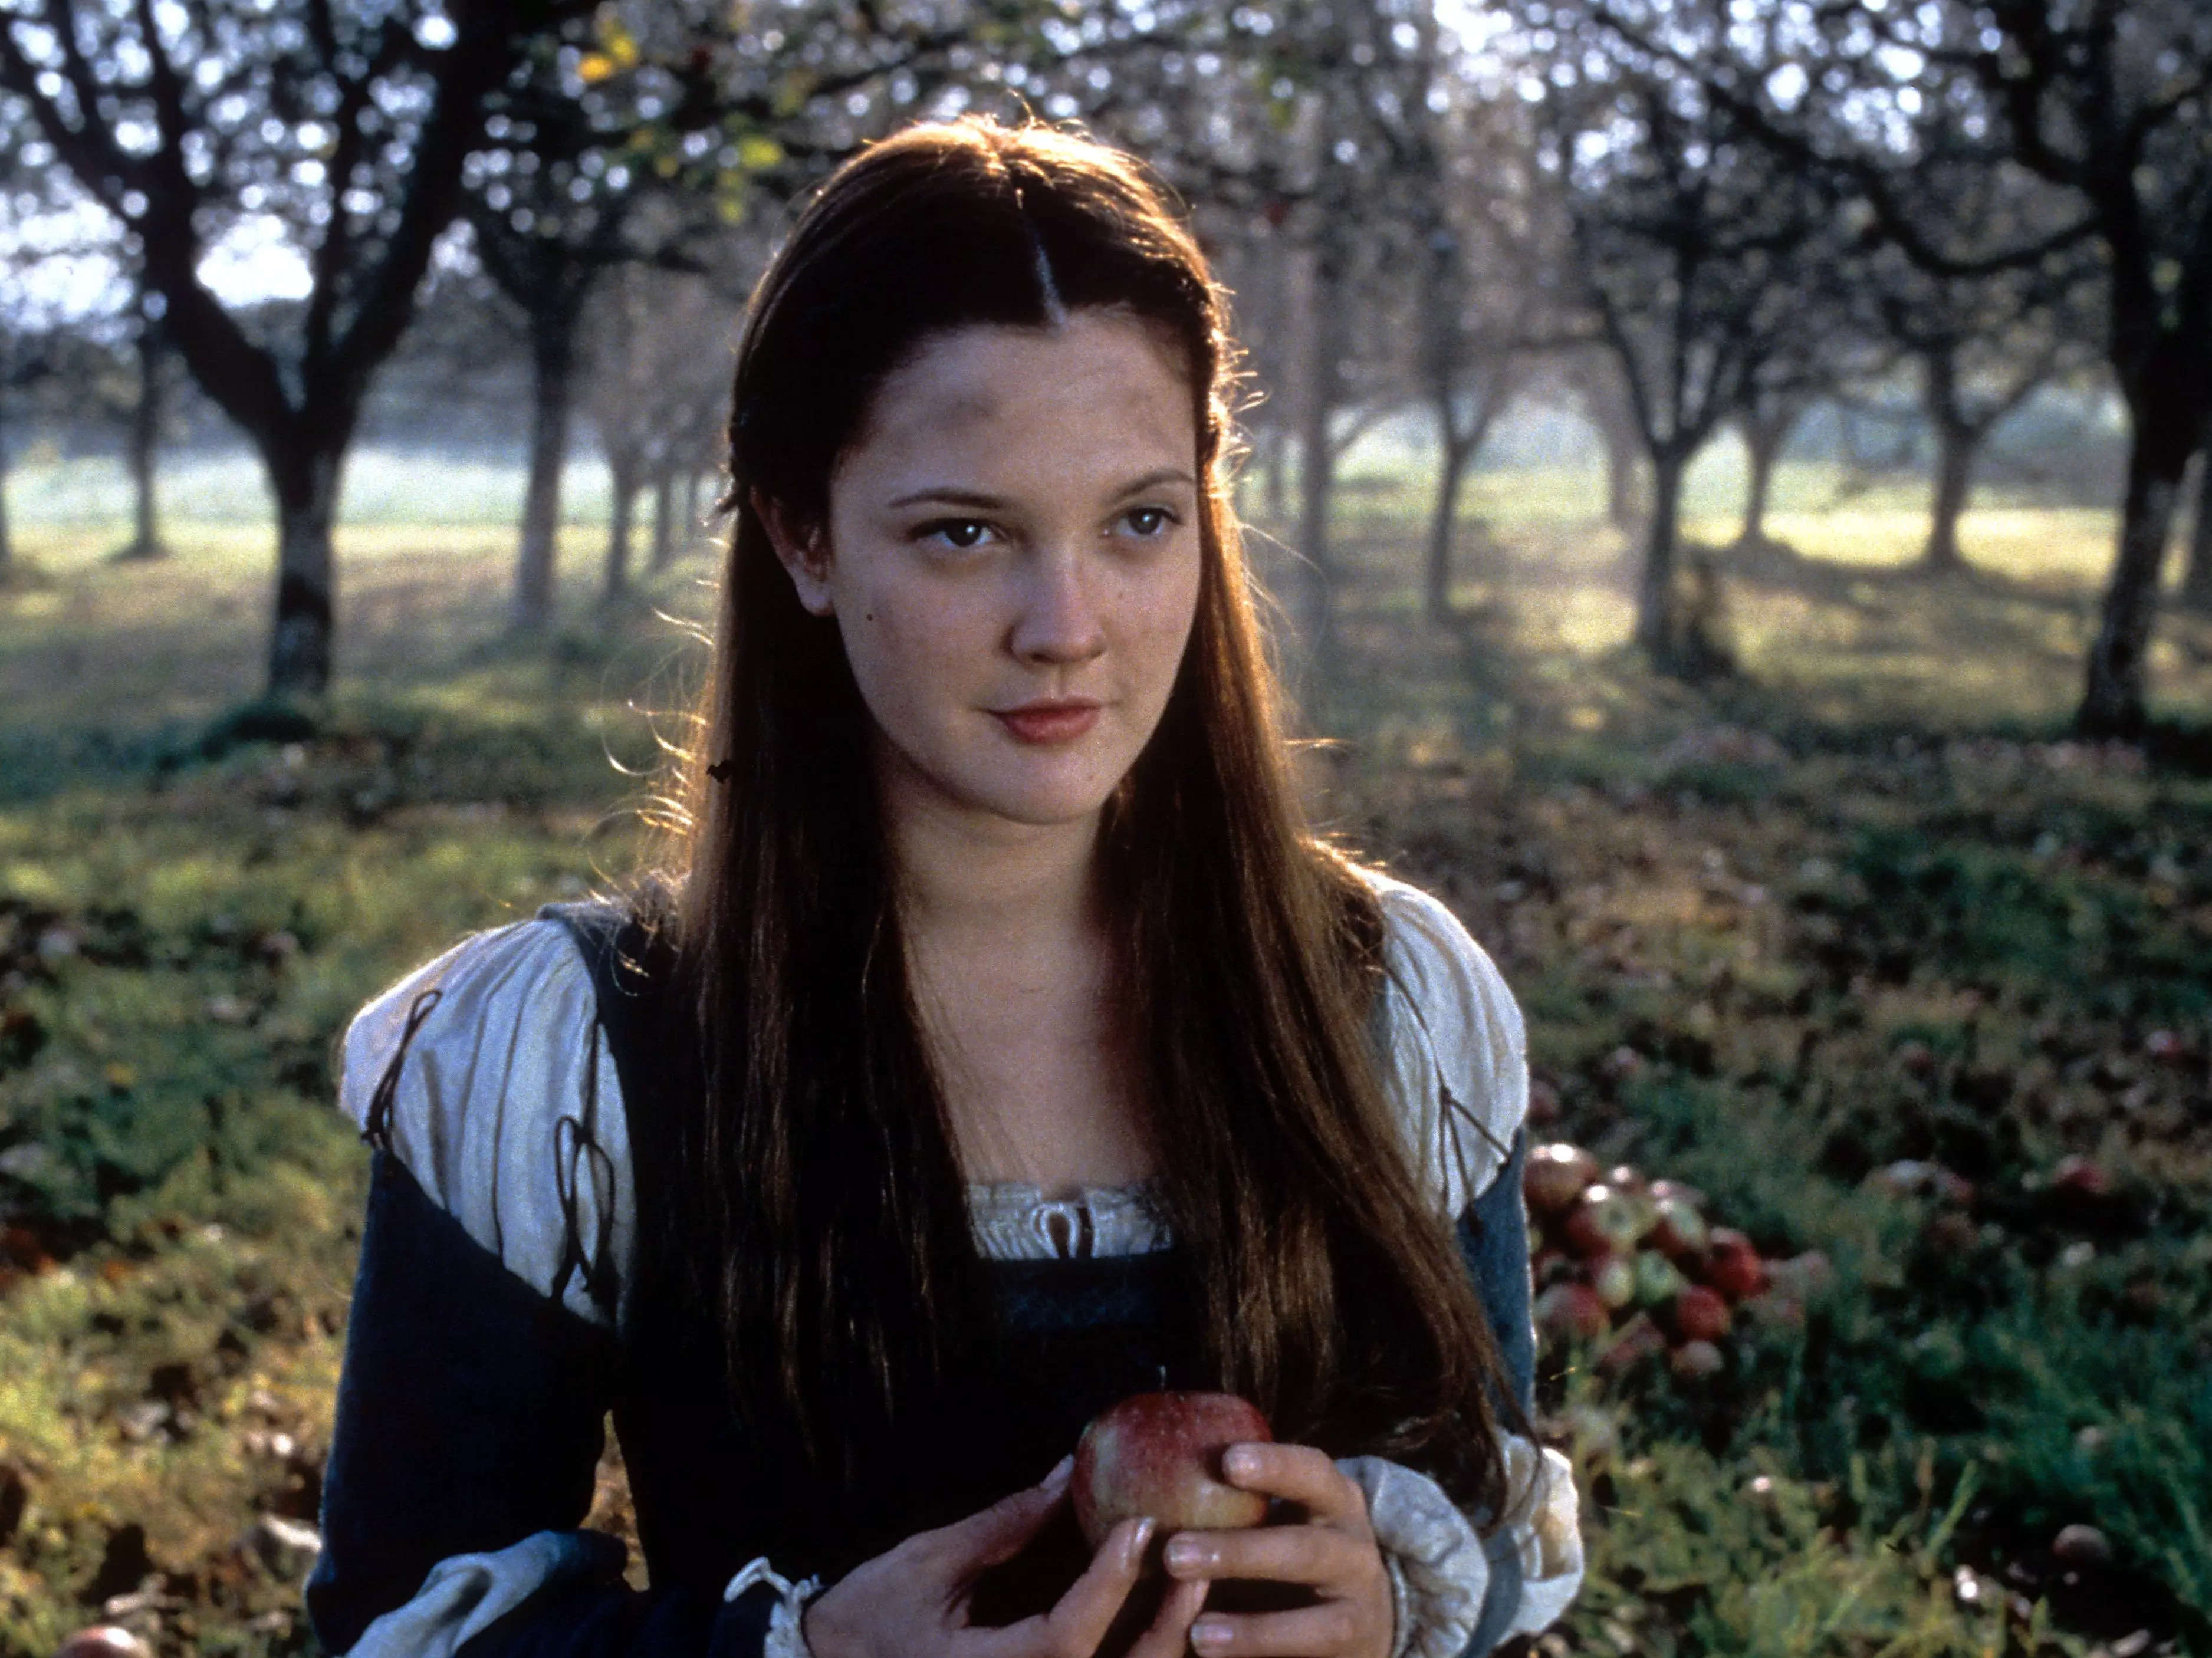 Drew Barrymore in "Ever After."